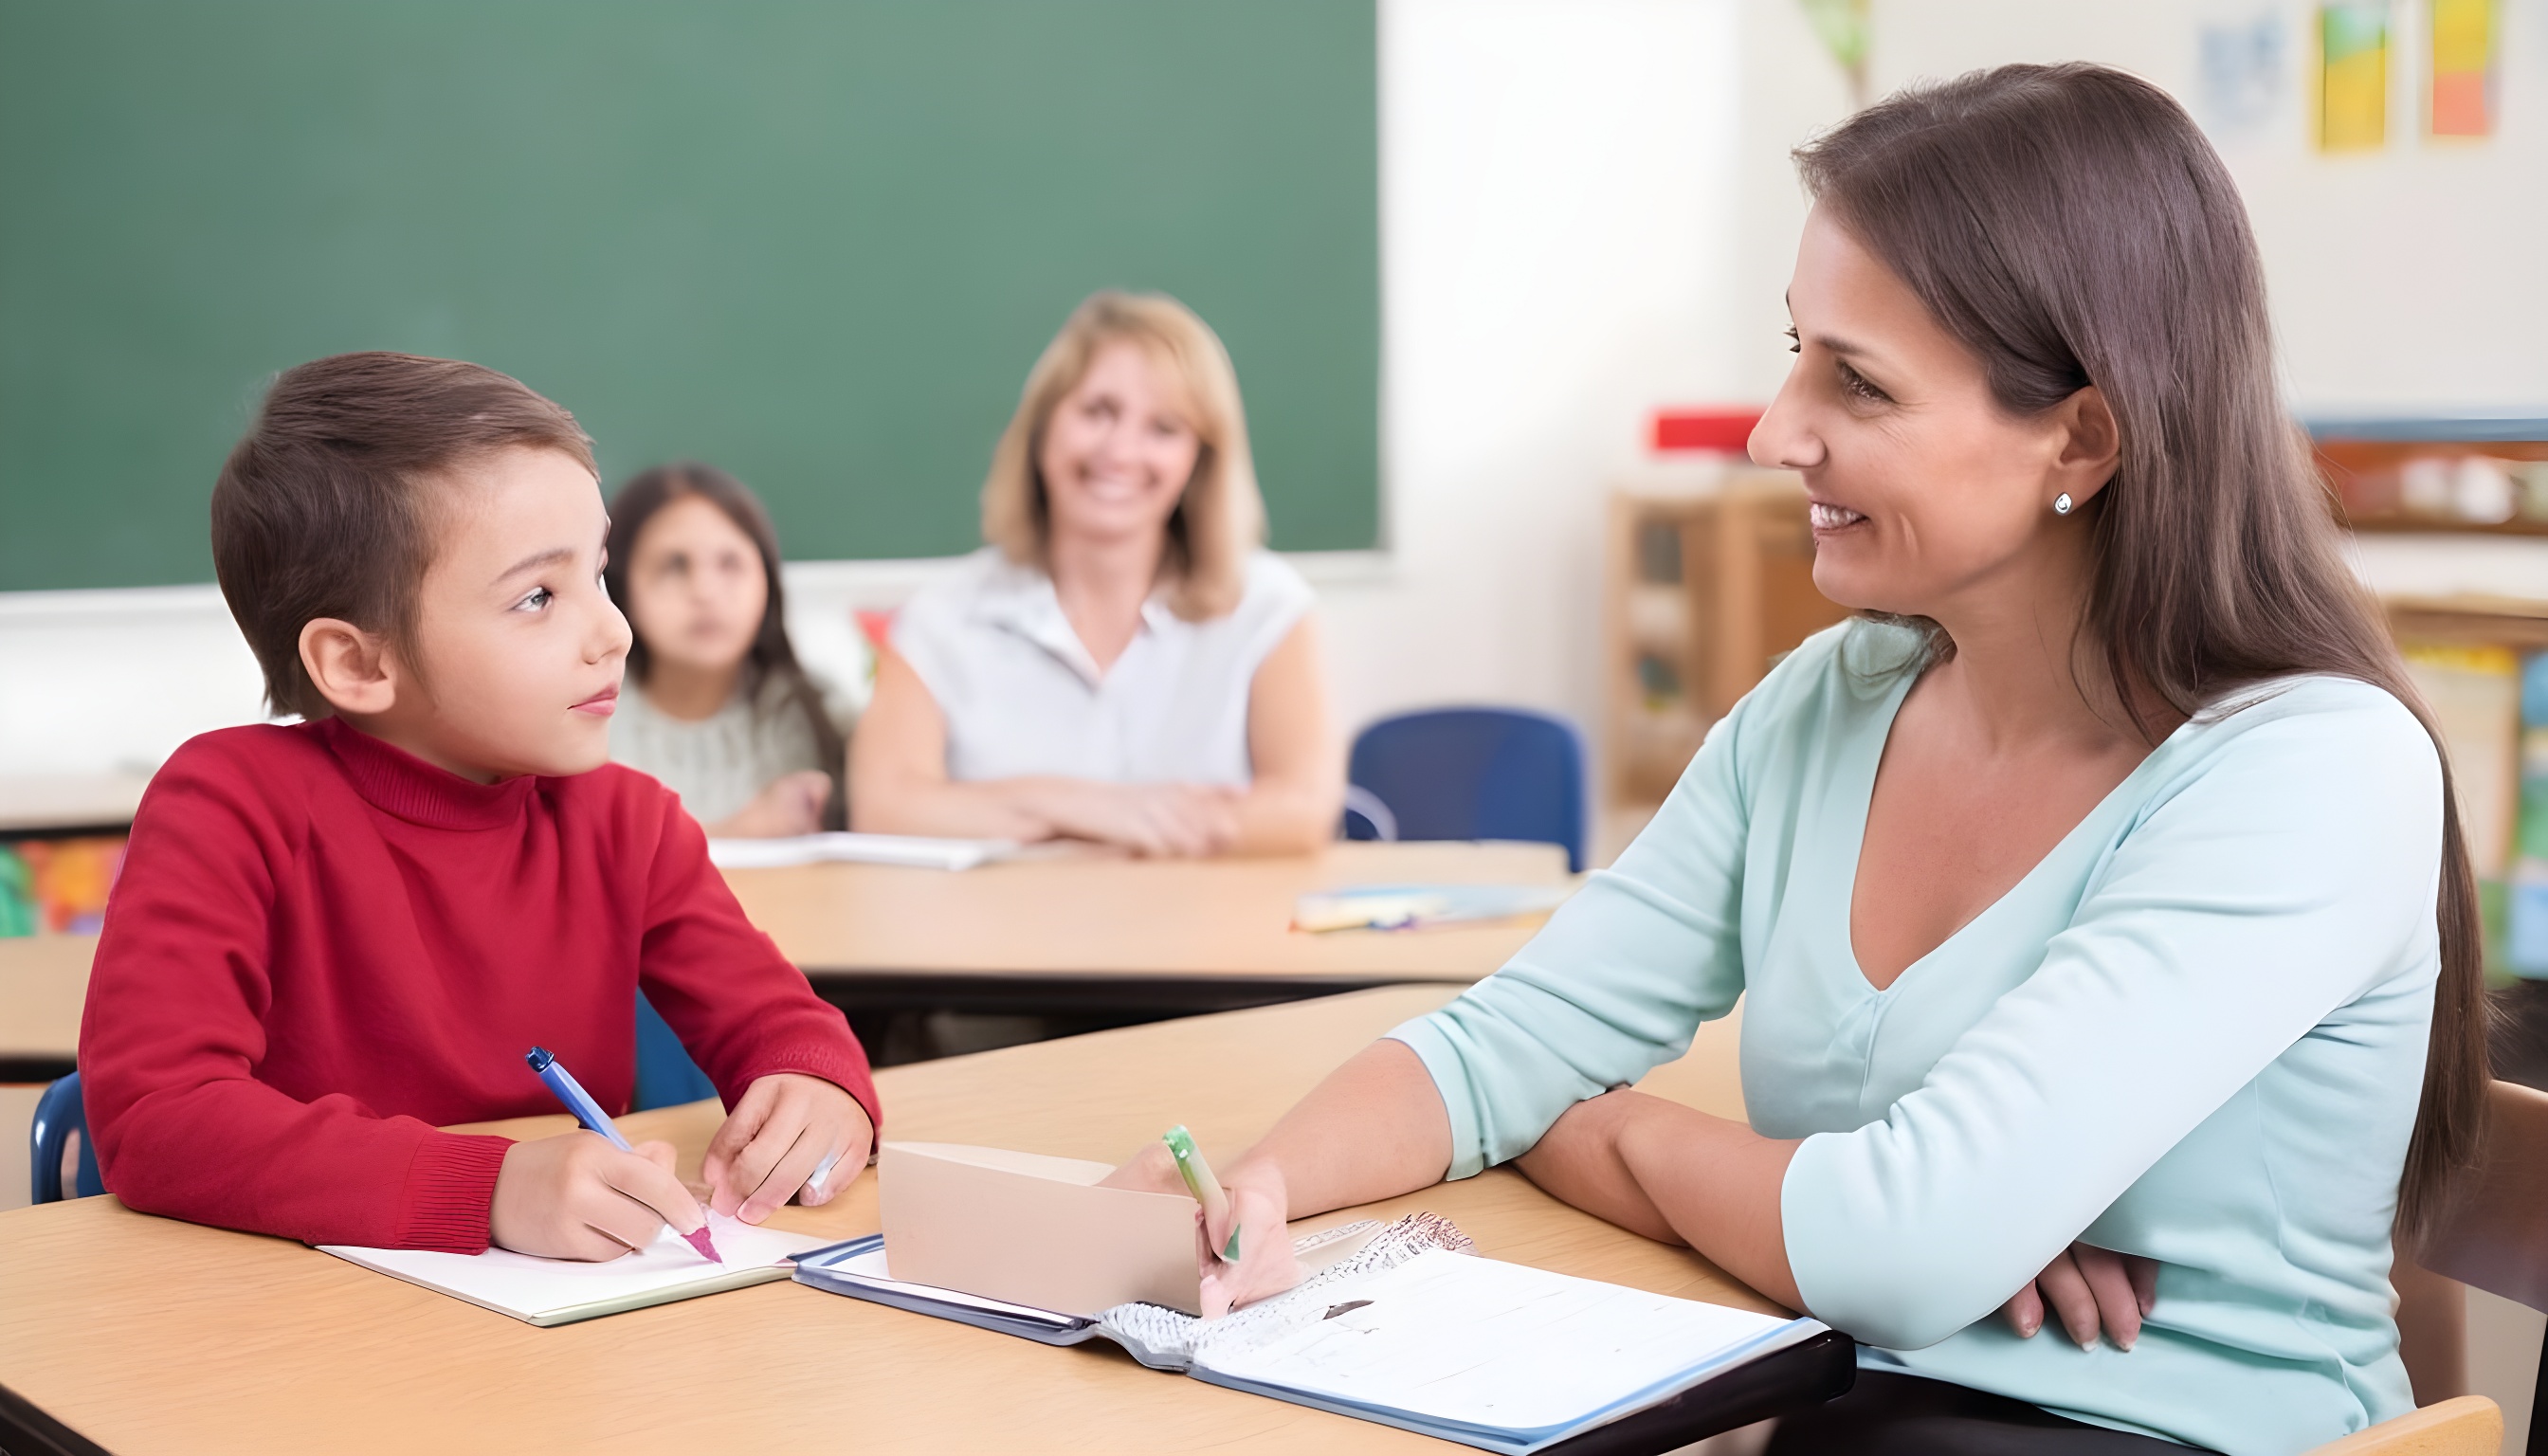 Points To Discuss In Parent-Teacher Meeting for Teachers